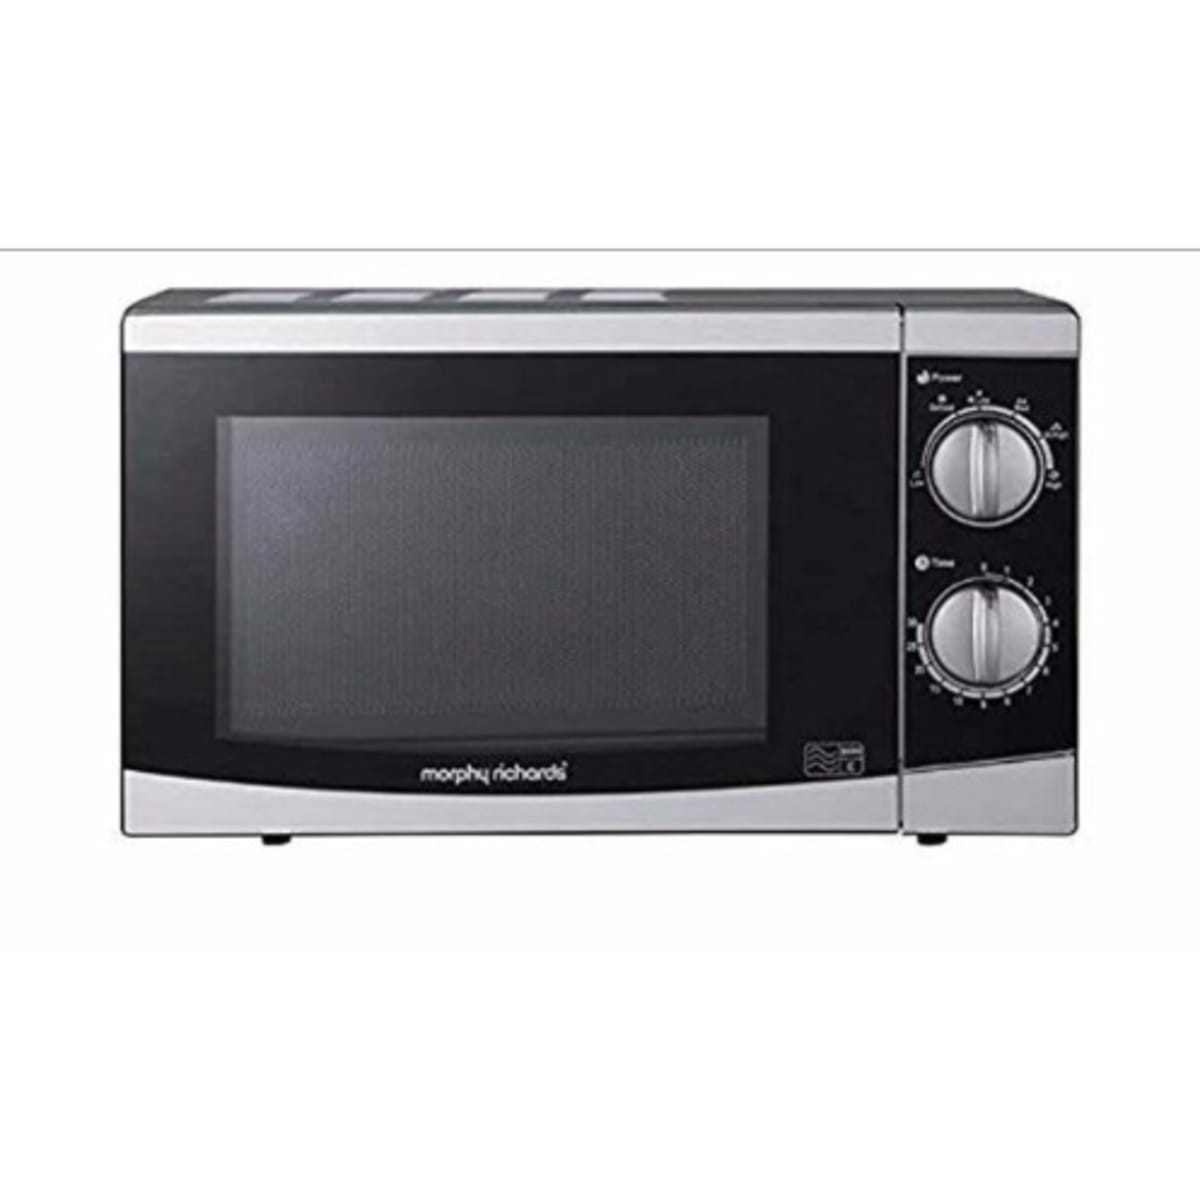 Morphy Richards P80H20P Compact Countertop Microwave Oven 20L 800W - Silver